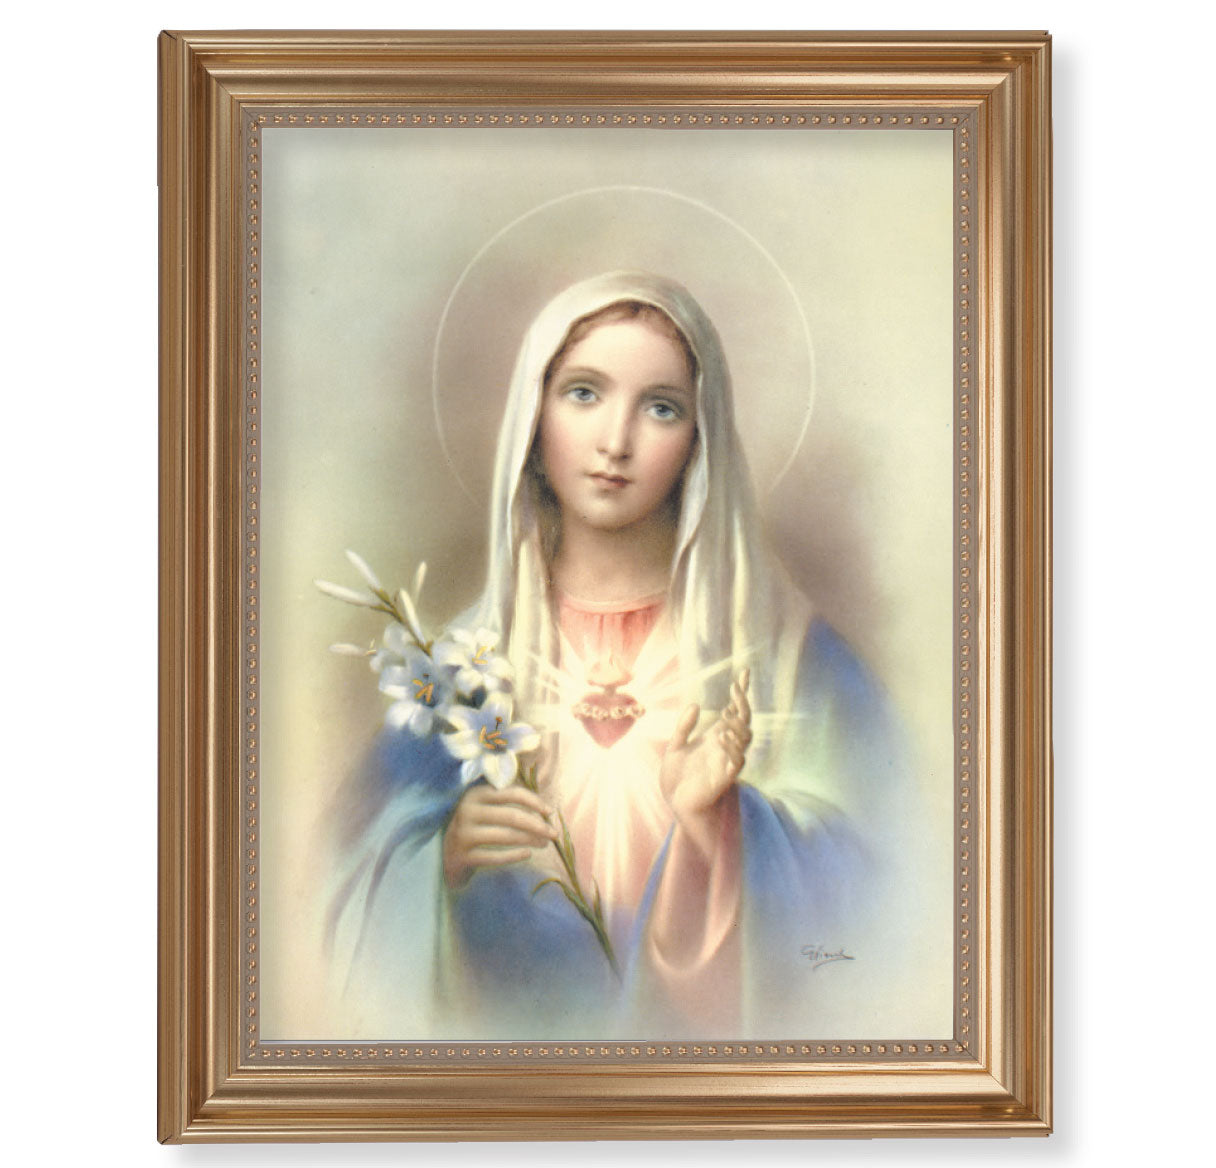 Immaculate Heart of Mary Gold Framed Art